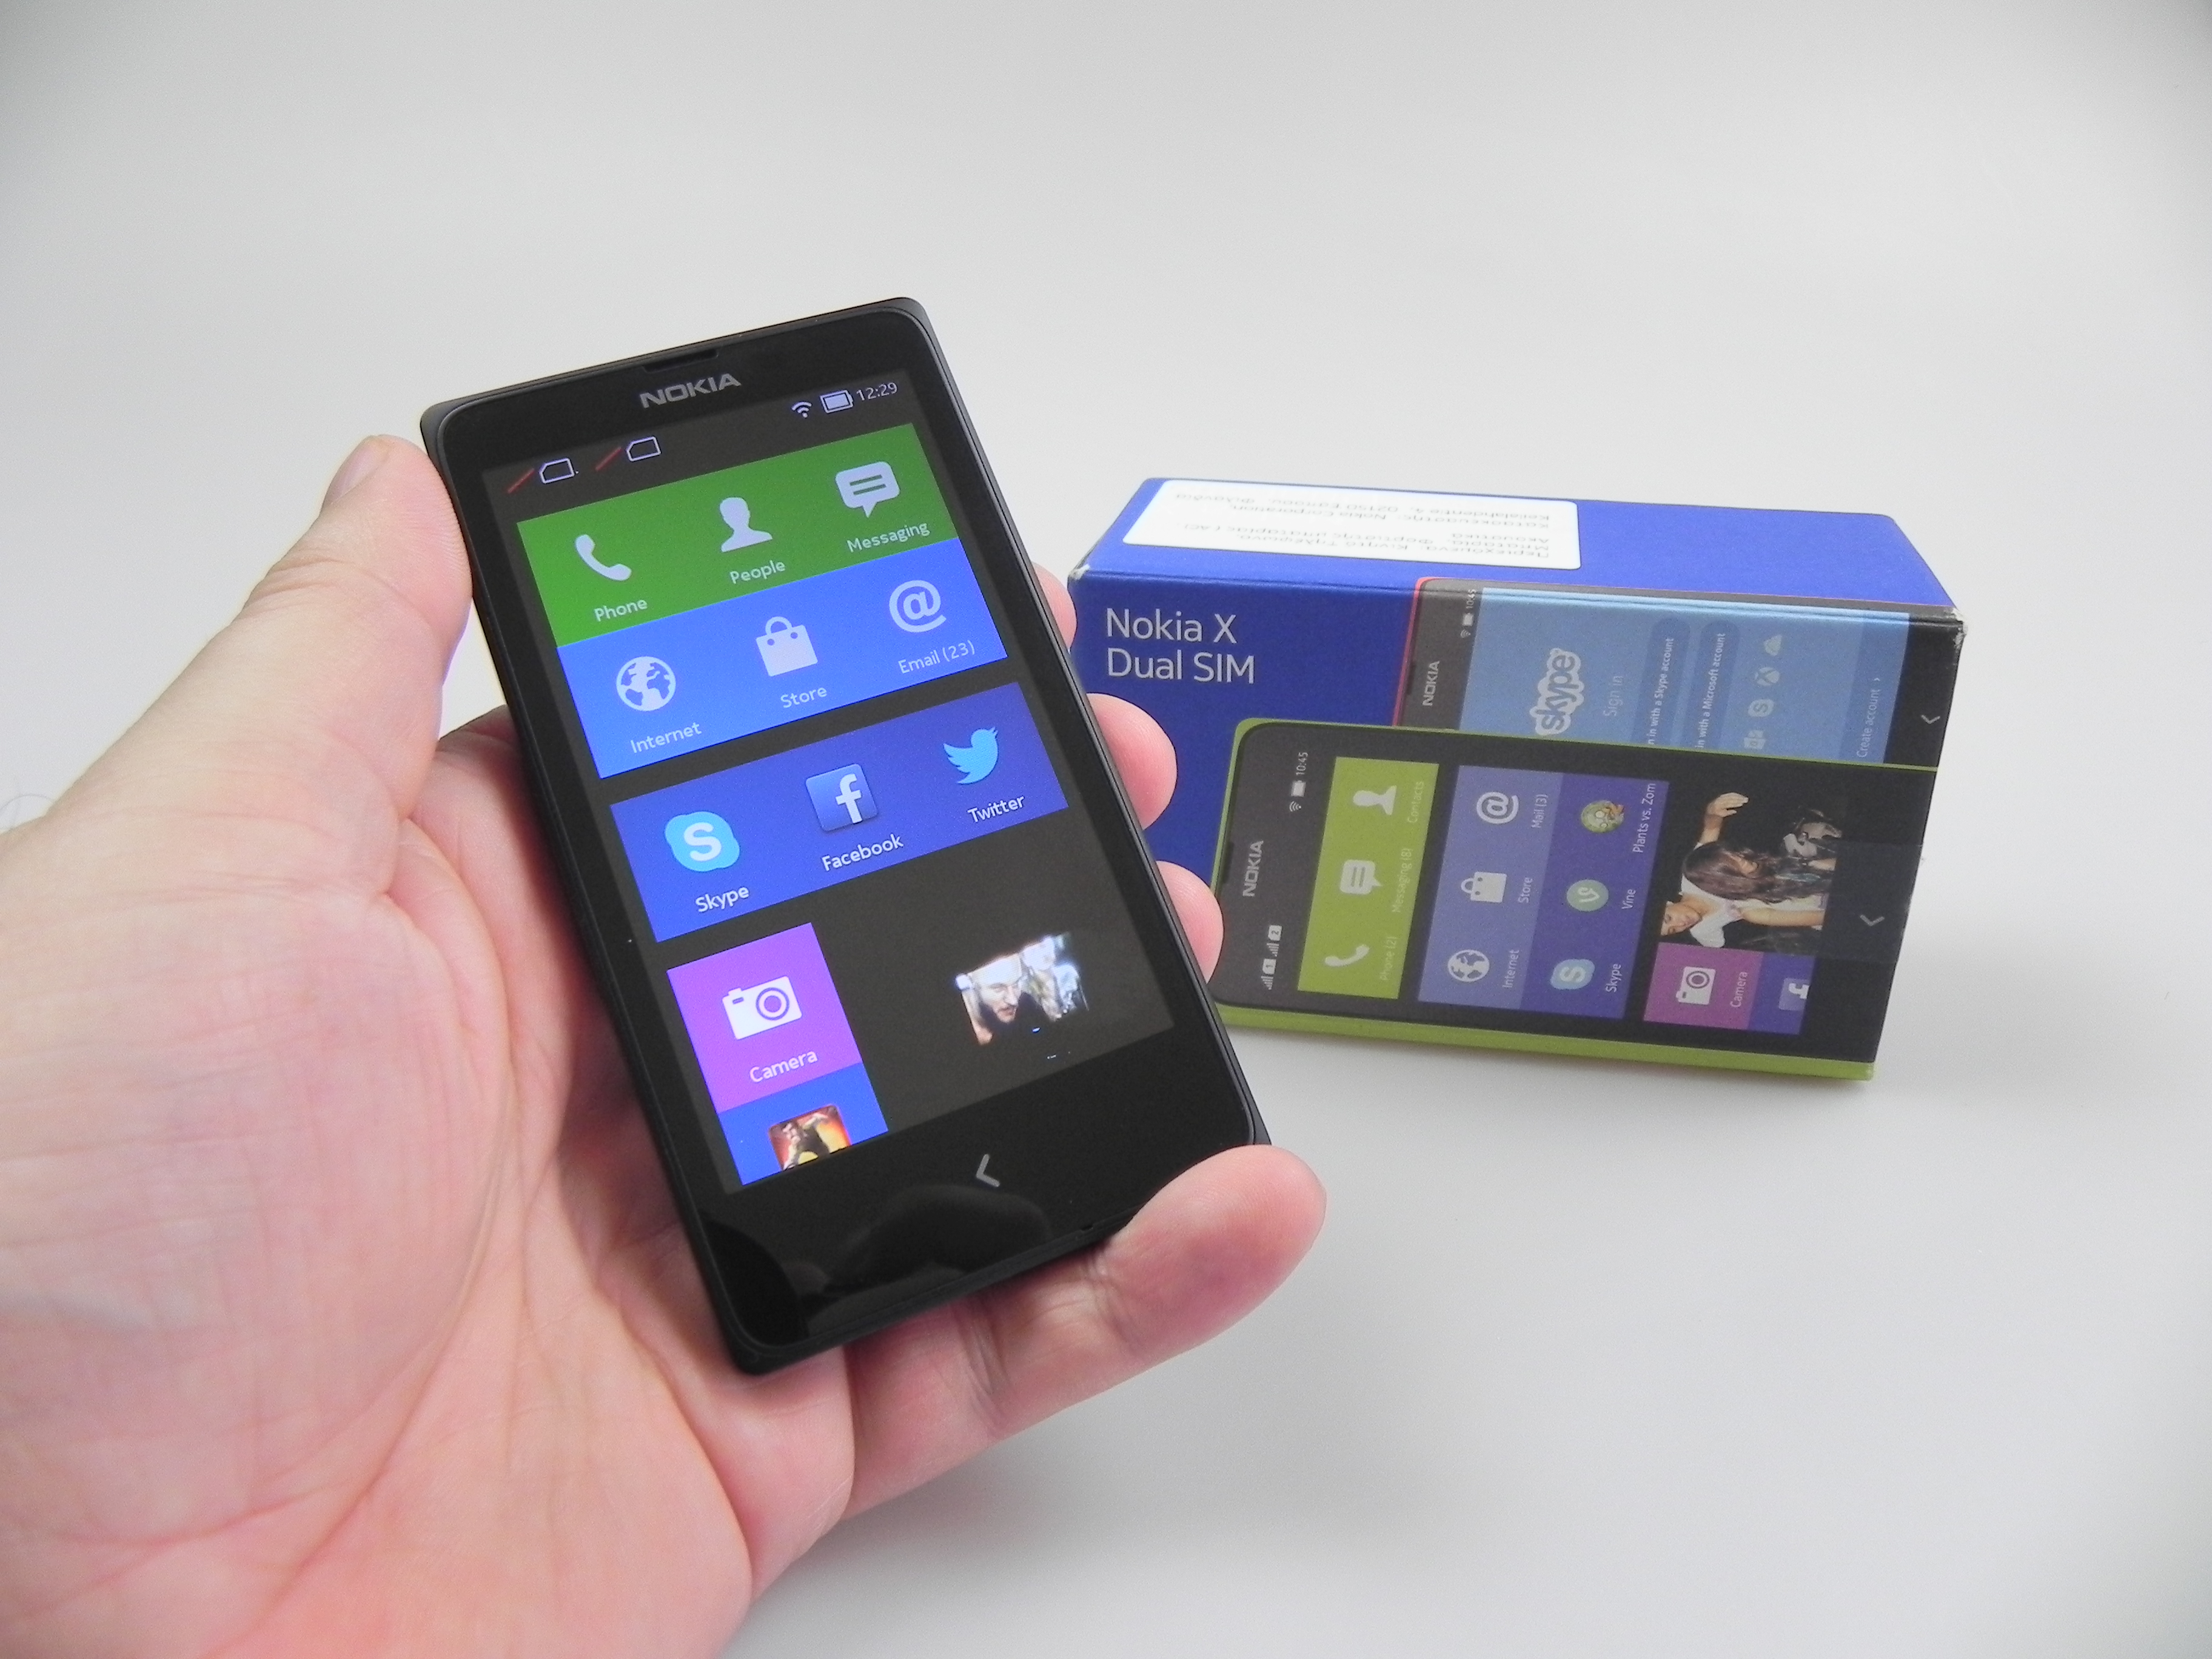 Www Xx Nokal Video - Nokia X Unboxing: the Little Android Nokia Comes Out to Play (Video) |  GSMDome.com